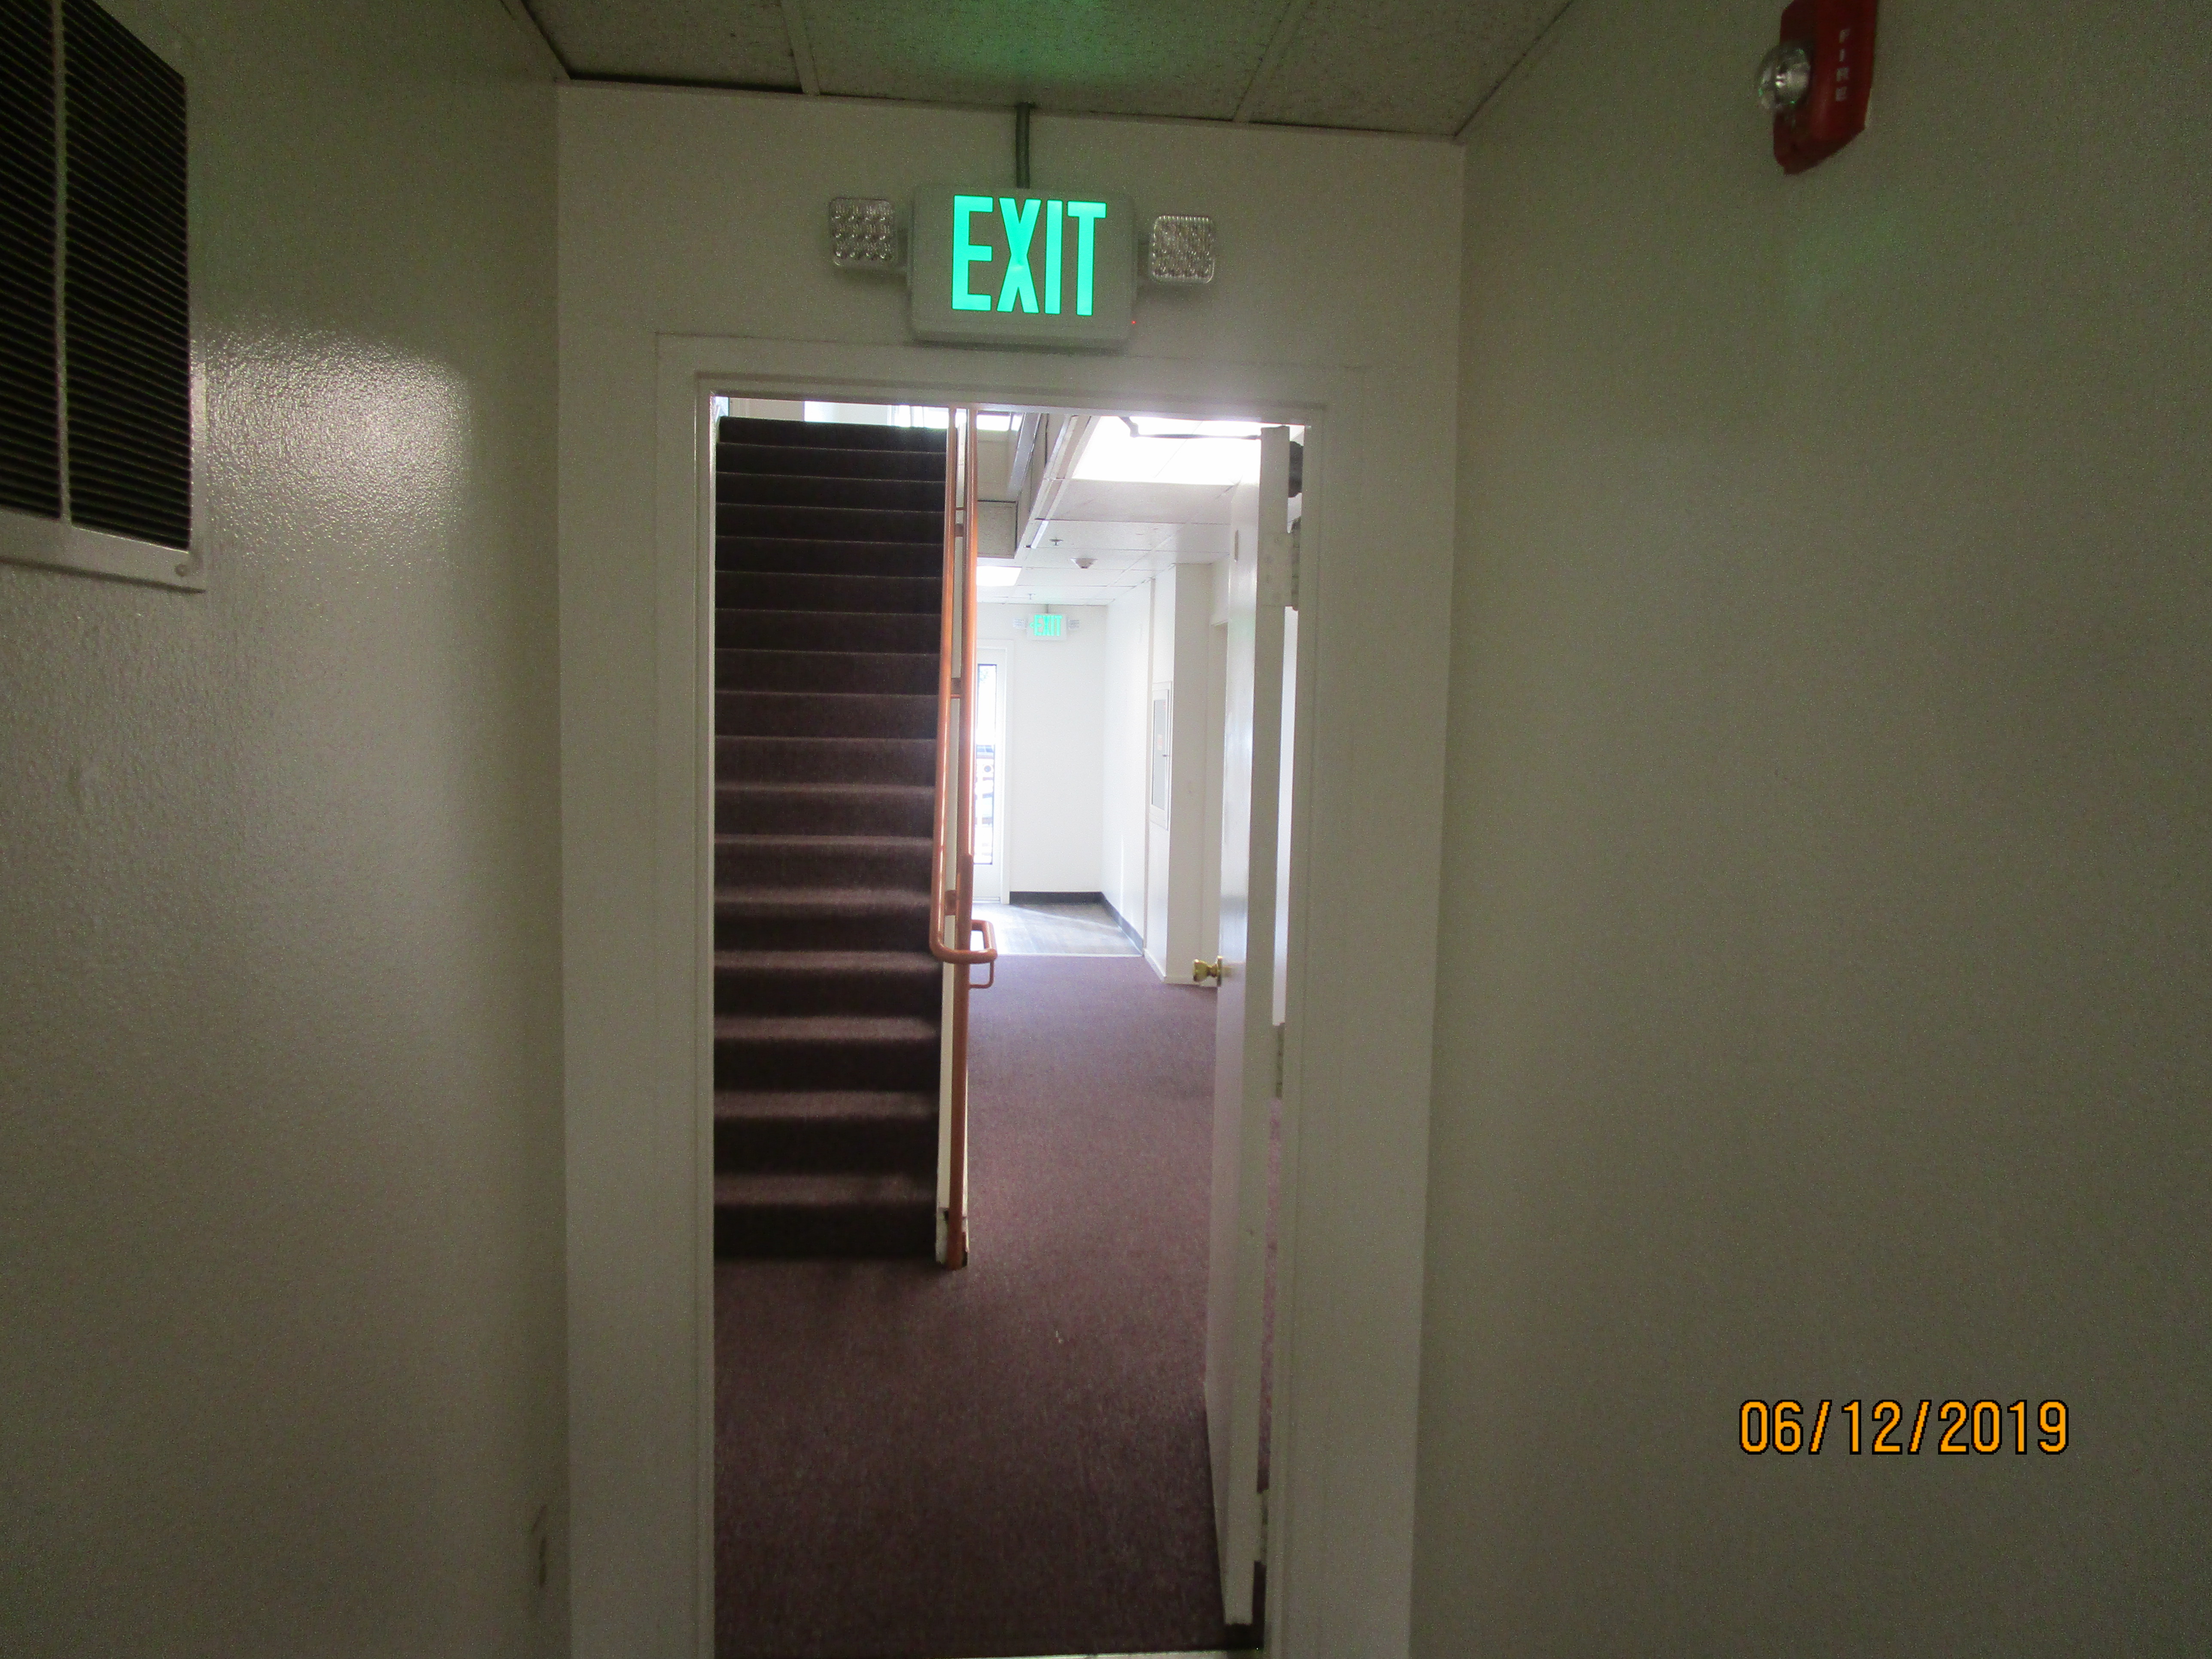 View of a hallway, stairs on the left side, doors and a exit on the right side.